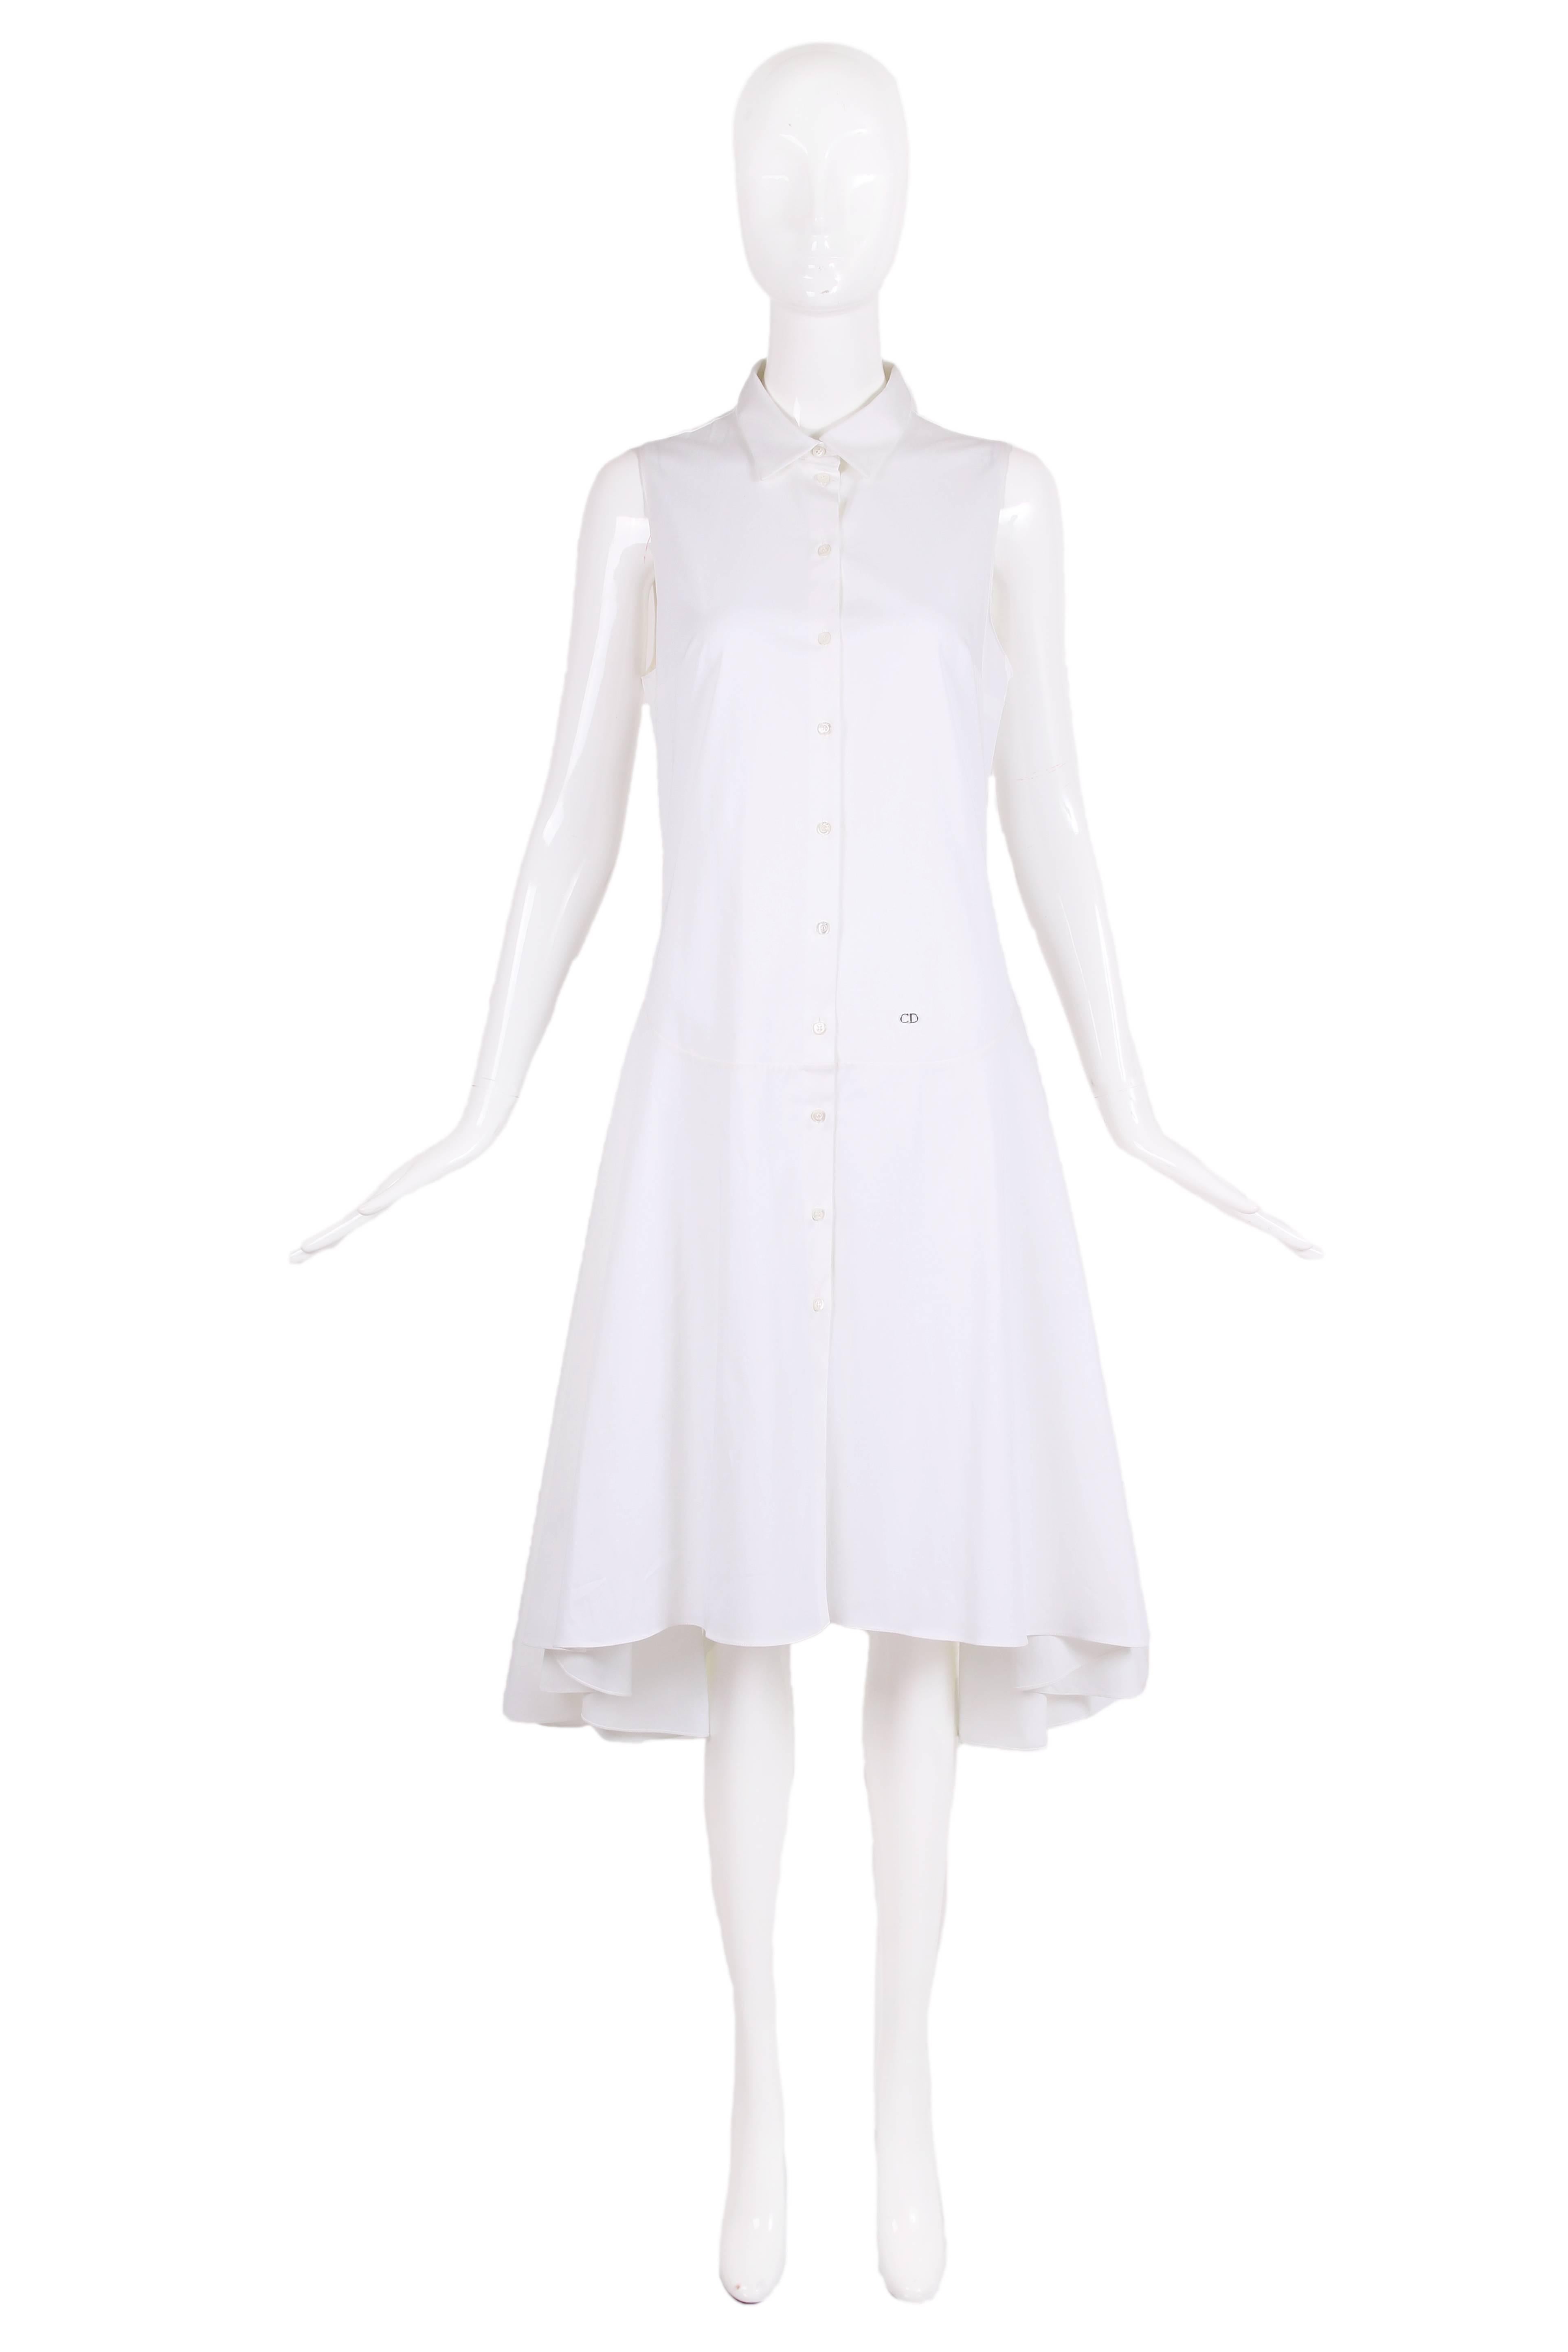 2013 Christian Dior by Raf Simons white cotton sleeveless day dress with dropped waist and high-low hem at sides. In excellent condition - size tag 8.
MEASUREMENTS:
Bust - 36